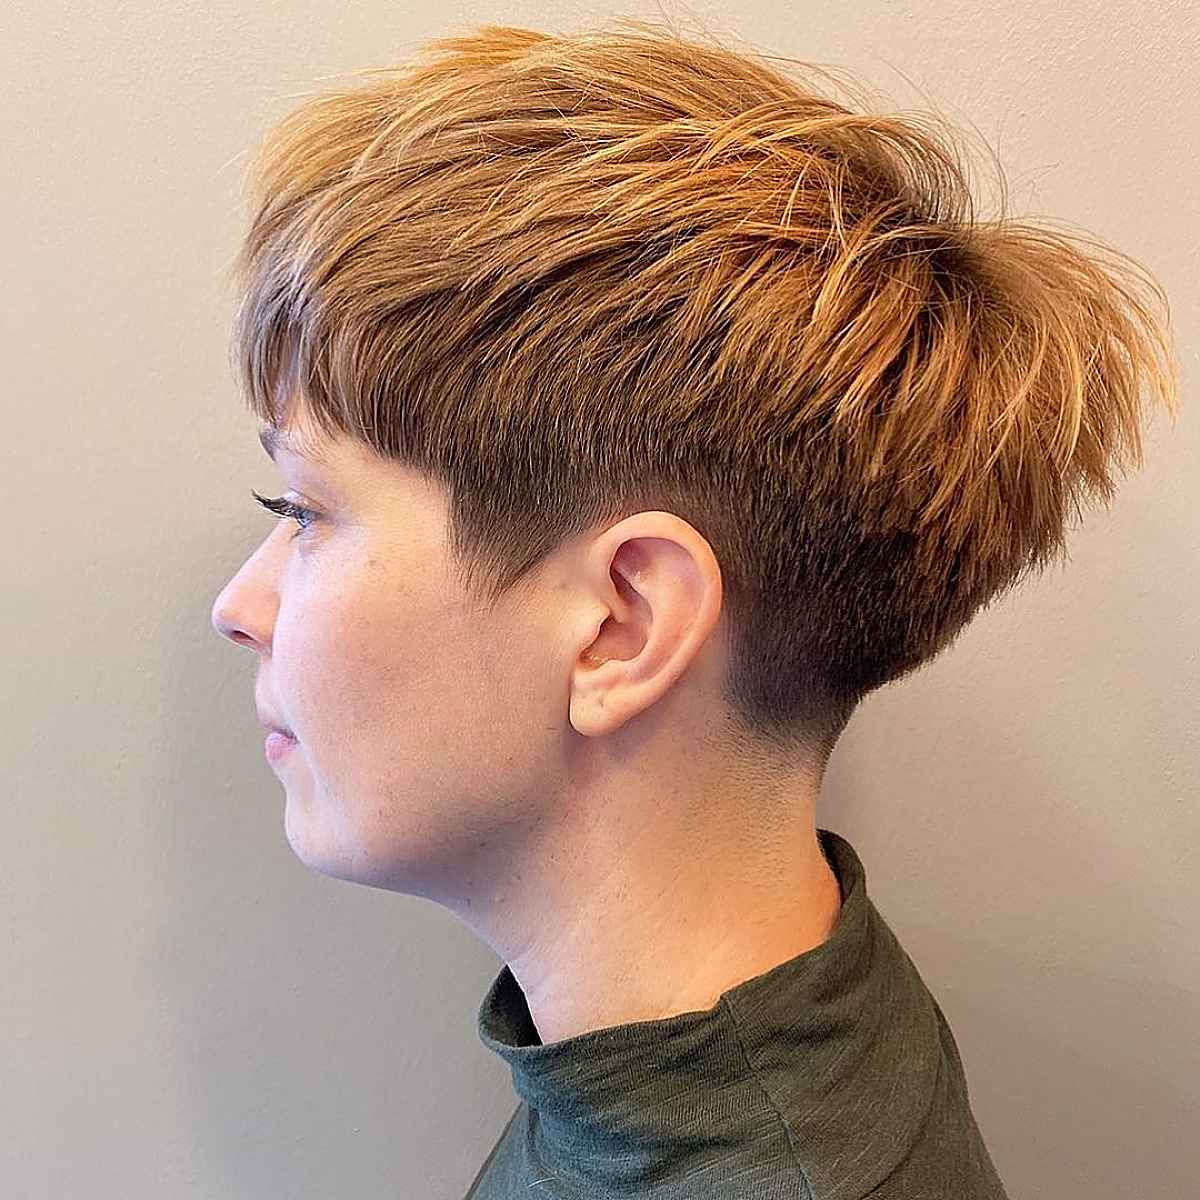 43 Types of Choppy Pixie Cuts Women Are Asking for This Year